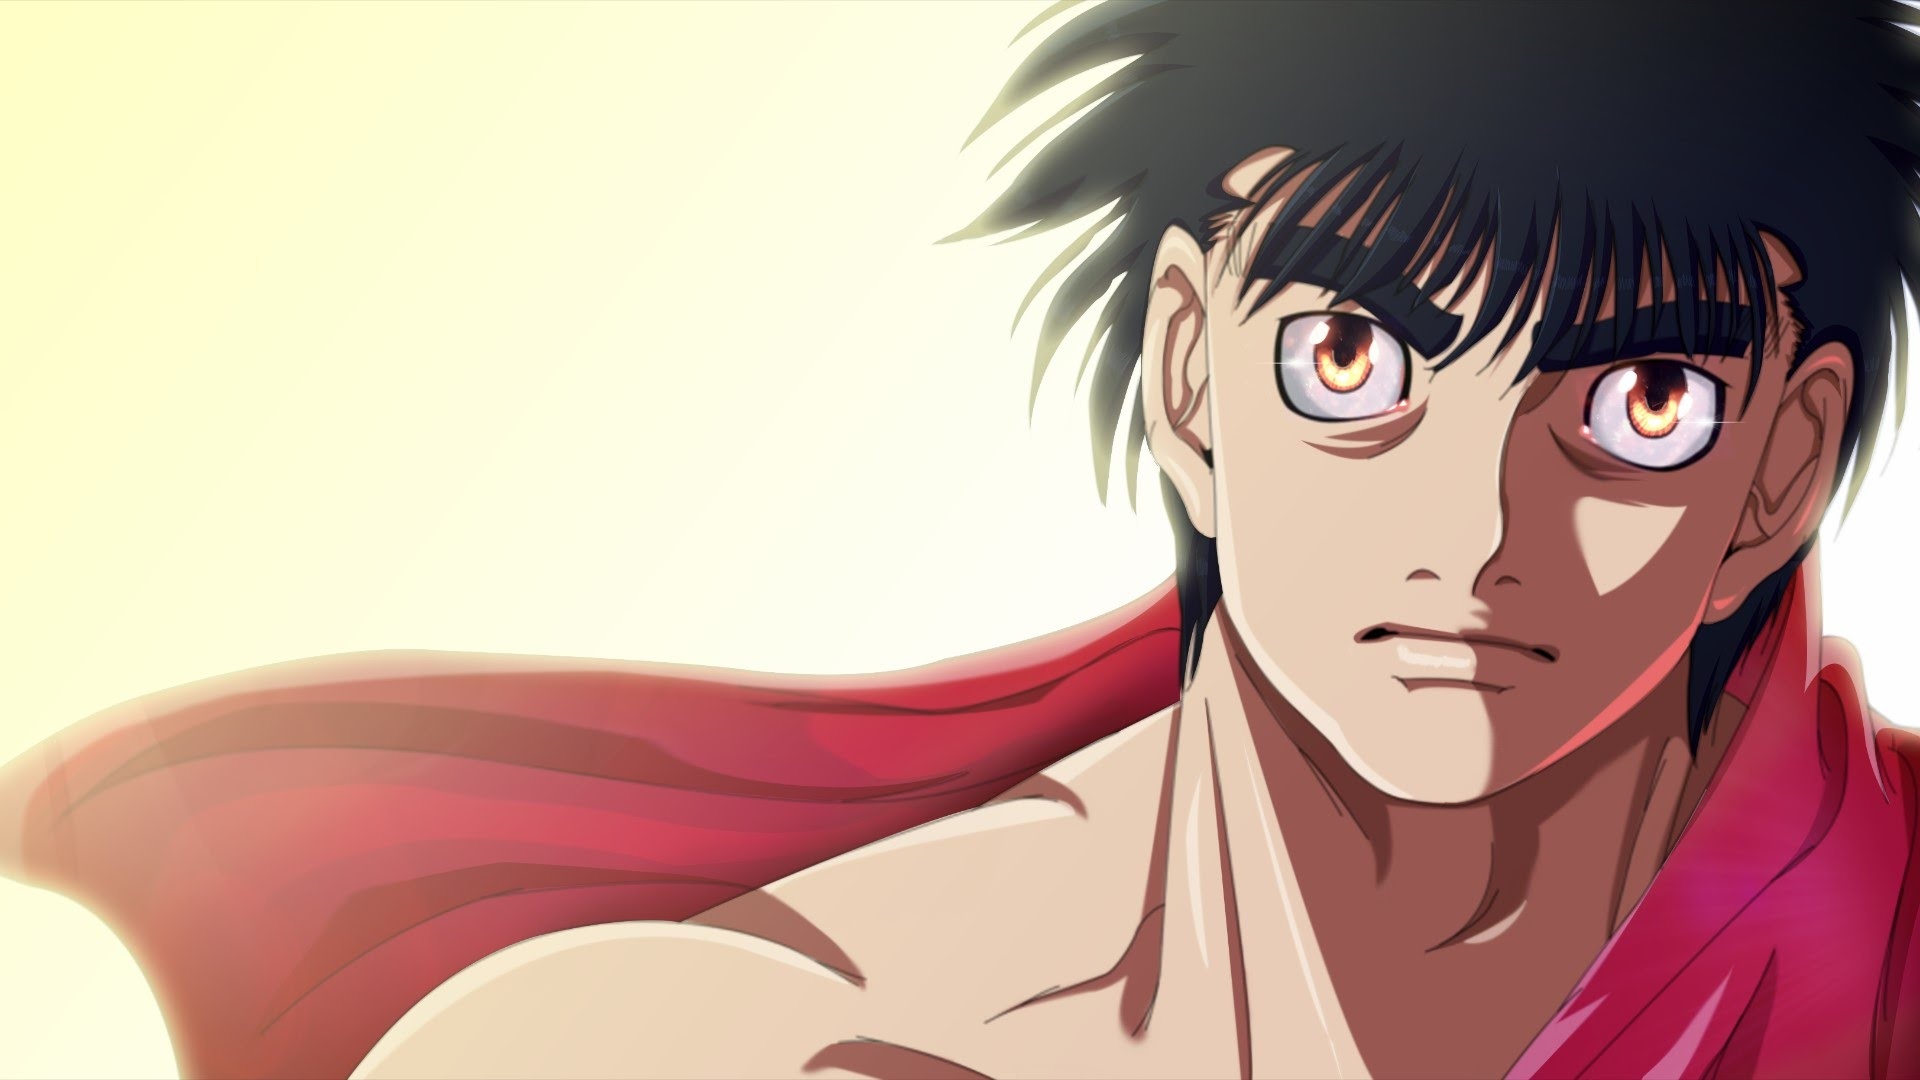 Anime Hajime no Ippo HD Wallpapers and Backgrounds 1920x1080